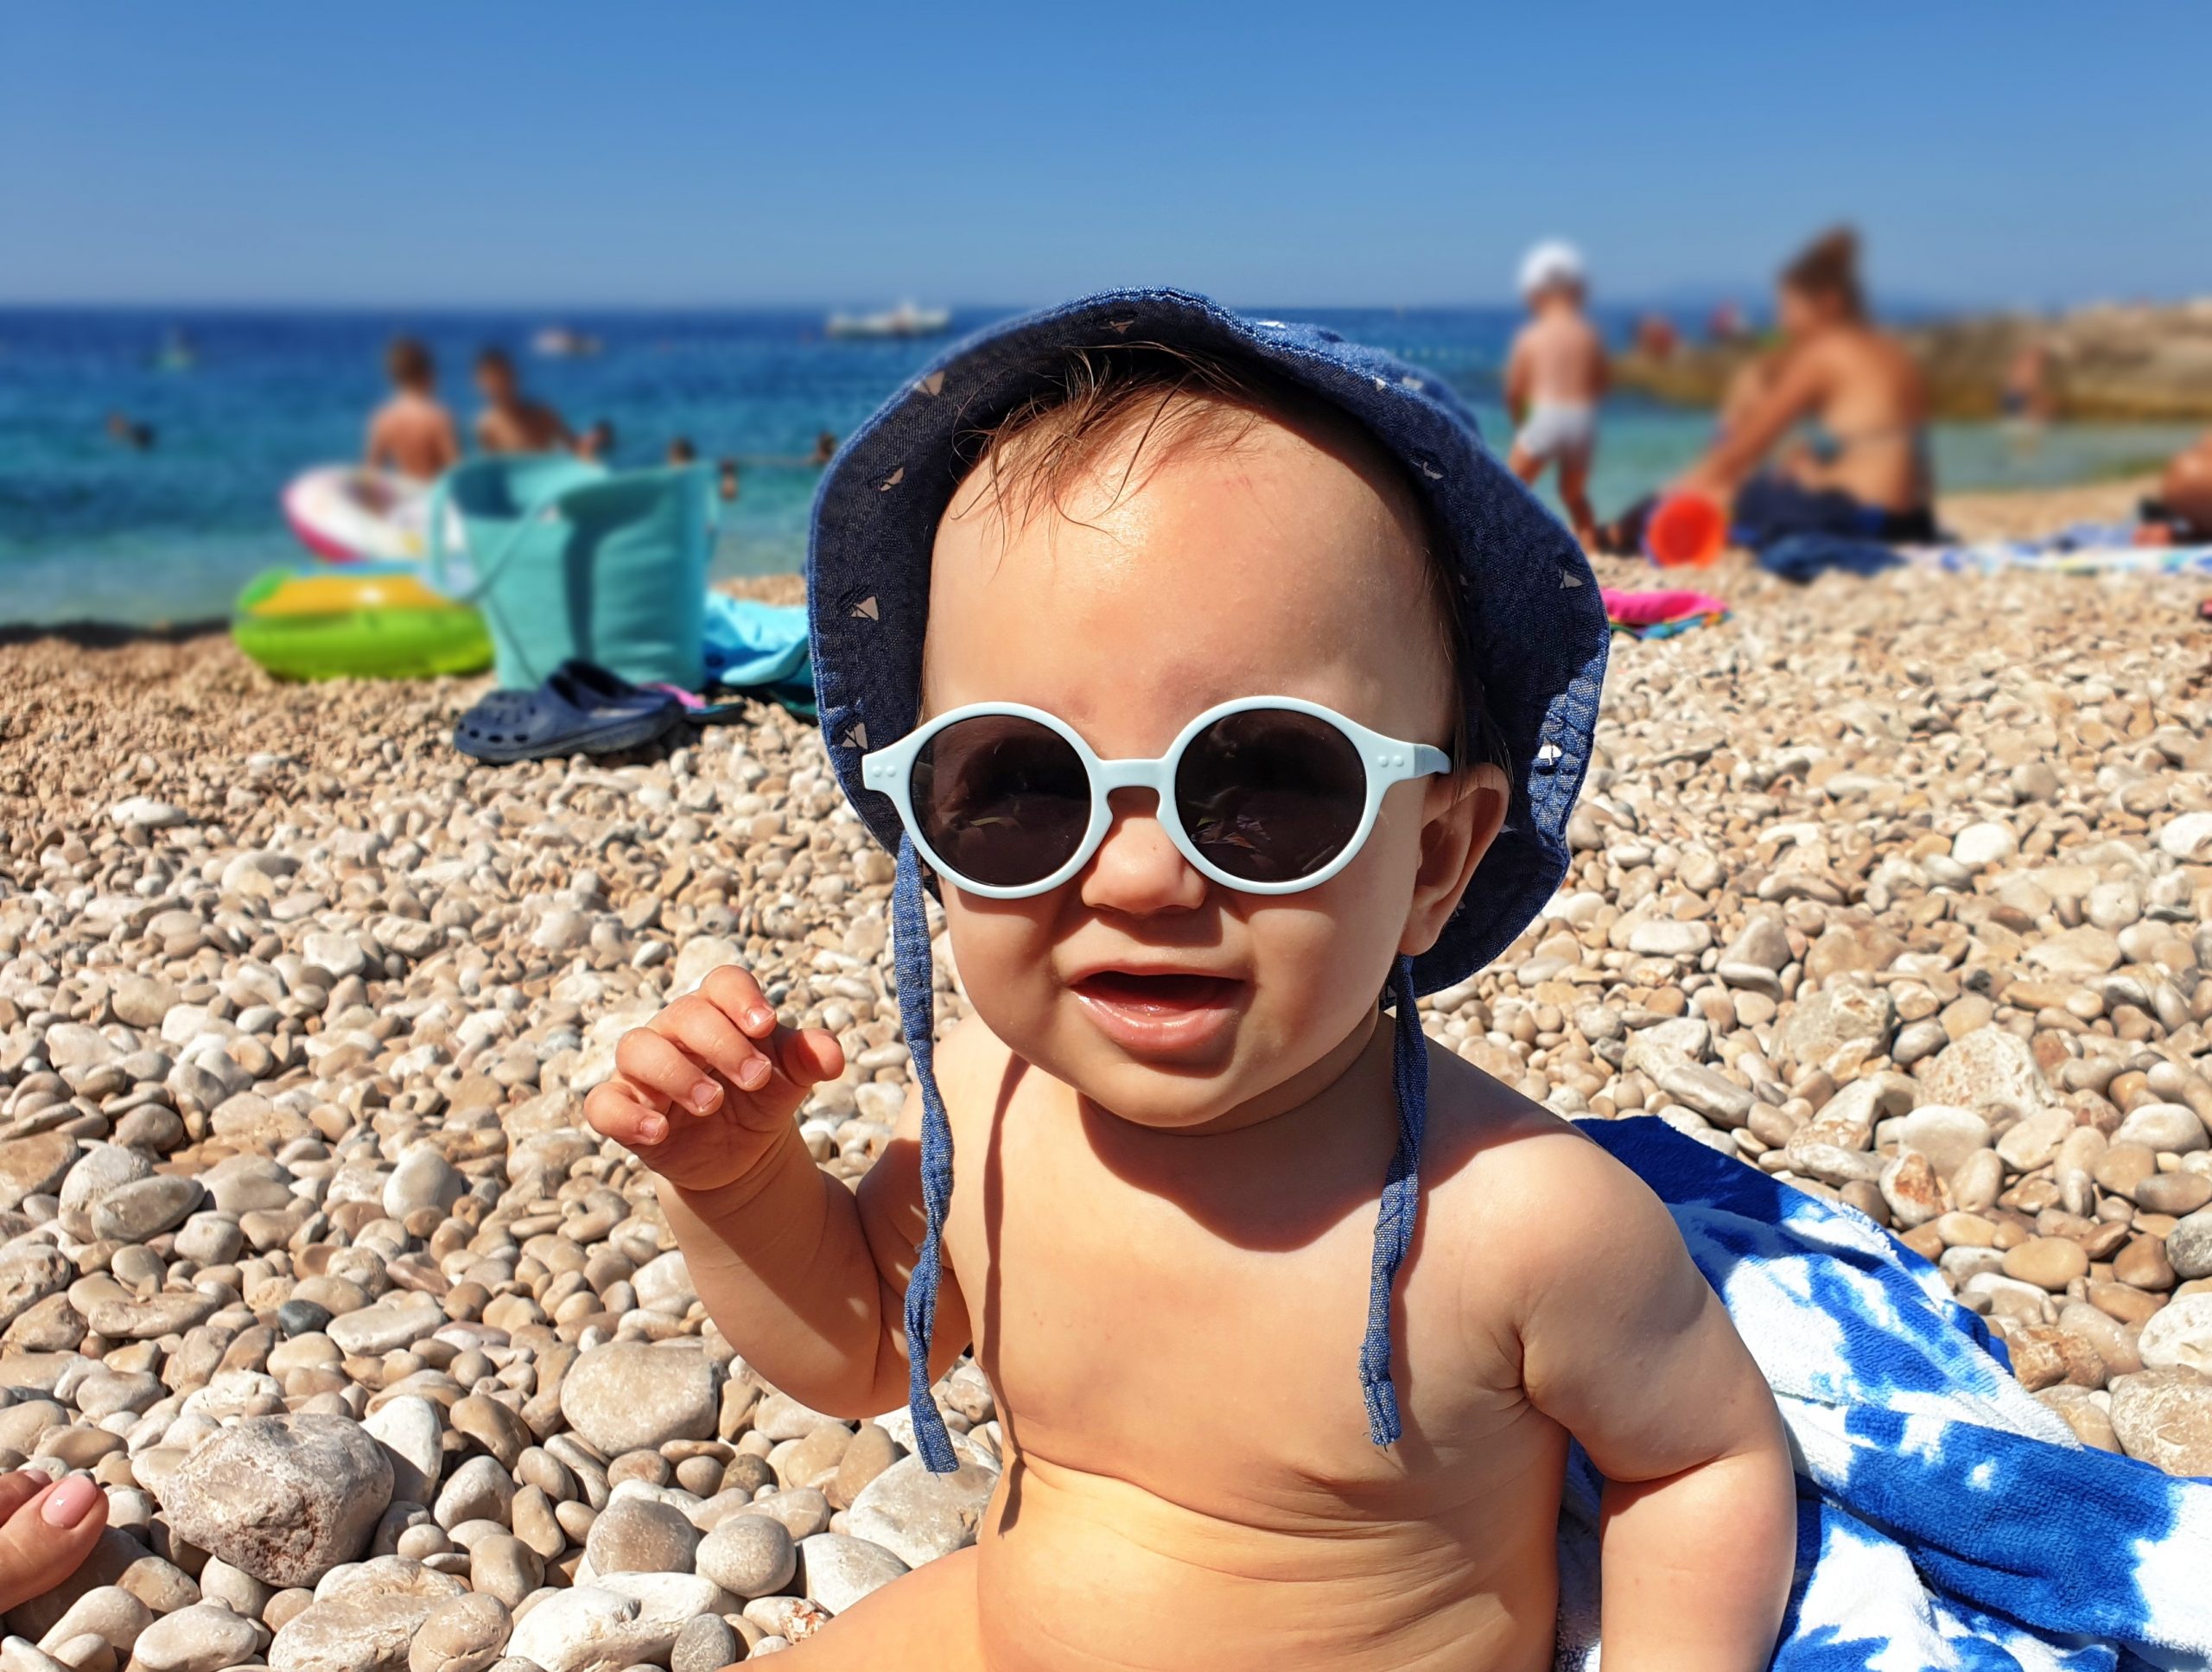 Keeping babies and toddlers safe in hot weather